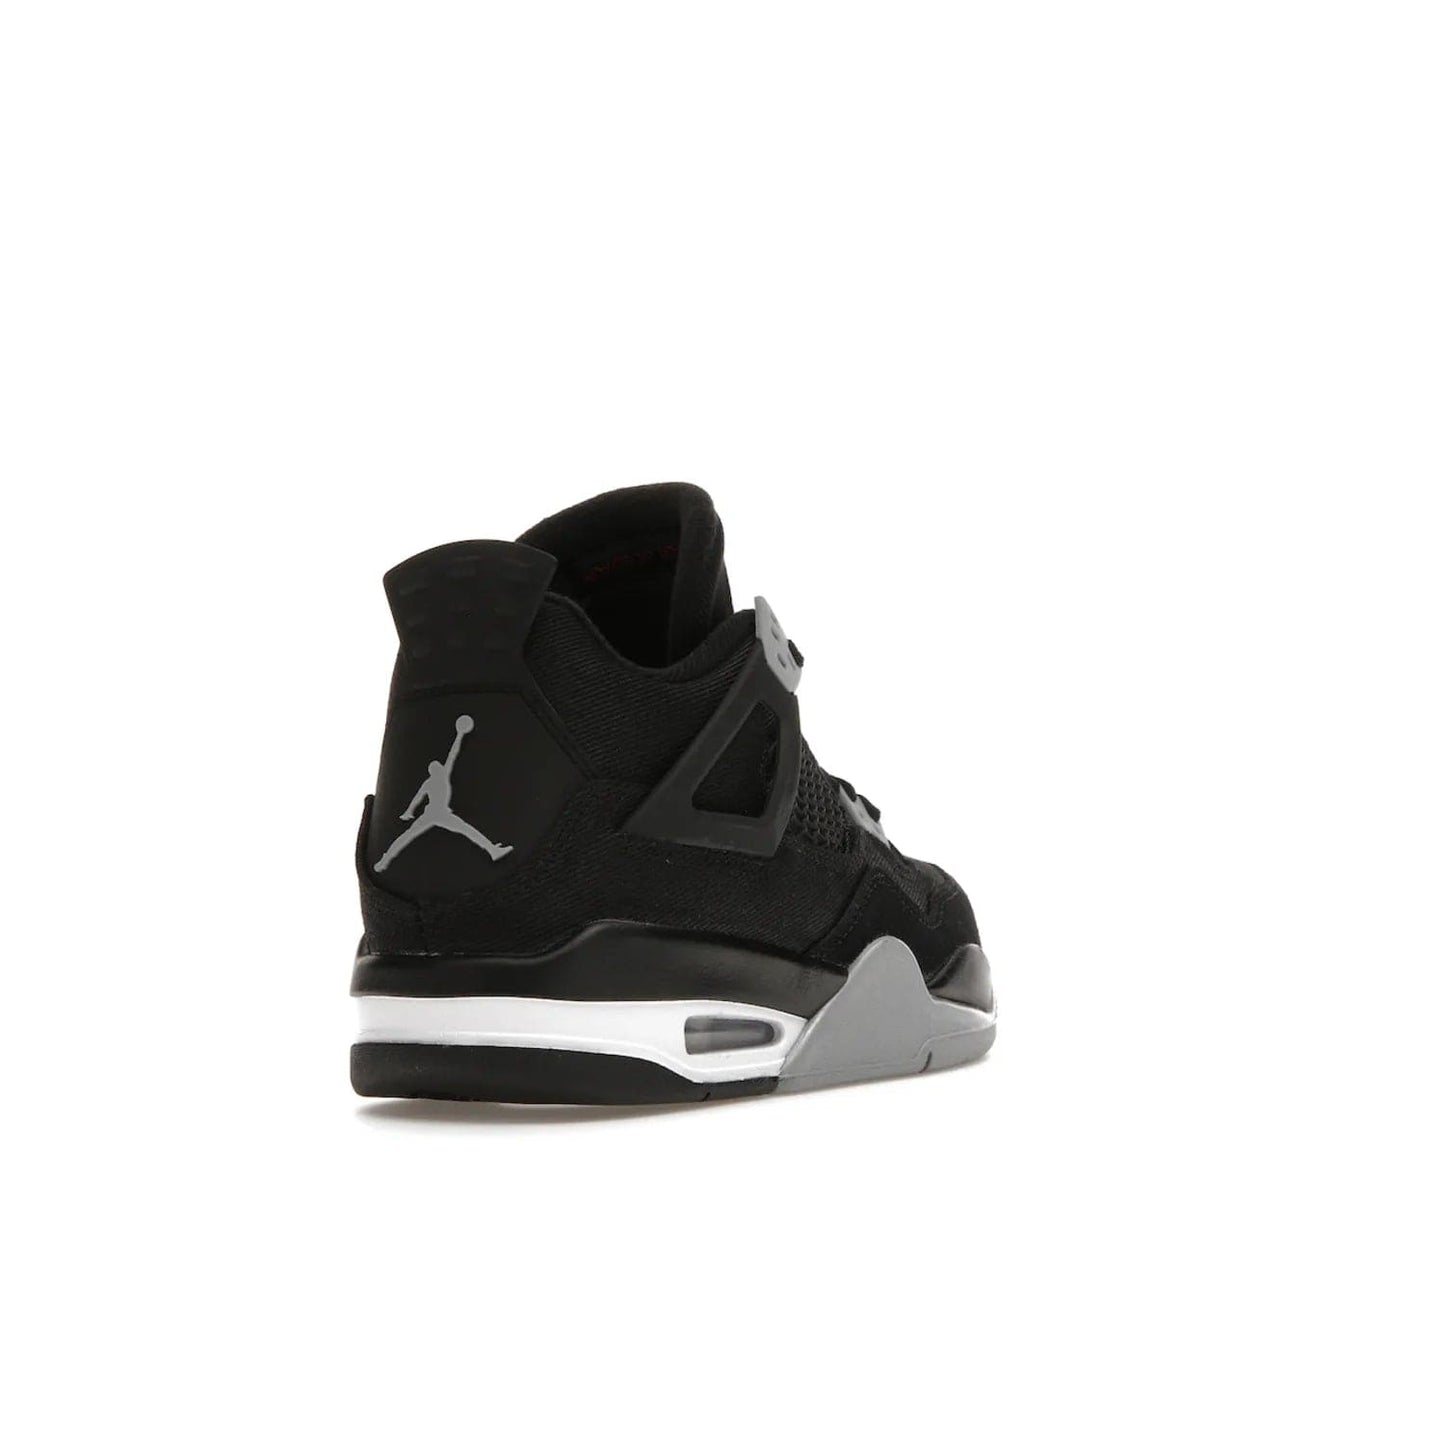 Jordan 4 Retro Black Canvas (GS) - Image 31 - Only at www.BallersClubKickz.com - Premium Air Jordan 4 Retro Black Canvas in grade-schooler's catalog. Featuring black suede canvas upper, grey molding, accents in red, white midsole, woven Jumpman tag, & visible AIR cushioning. Releasing Oct. 1, 2022.